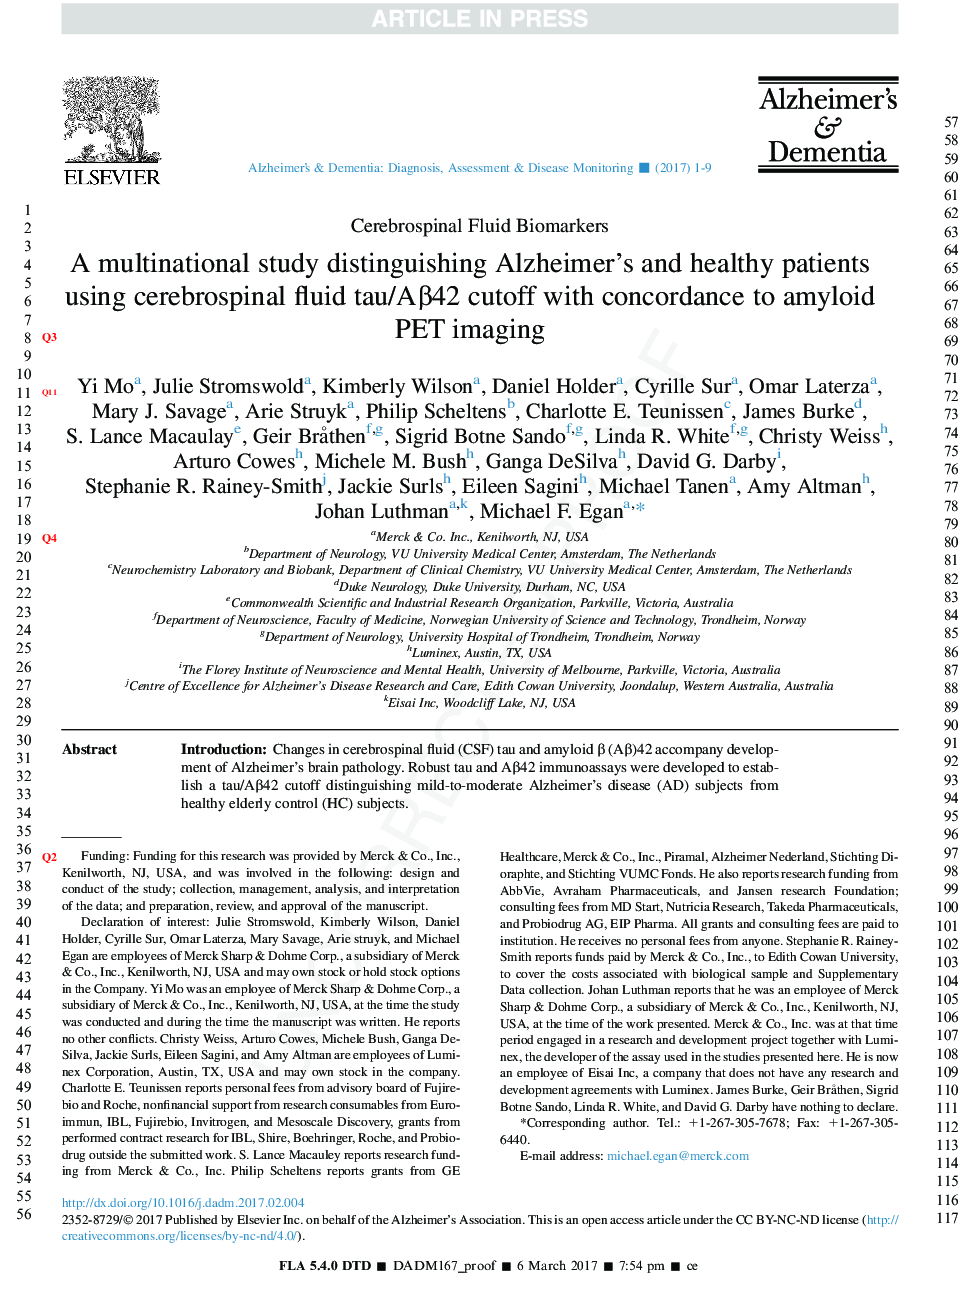 A multinational study distinguishing Alzheimer's and healthy patients using cerebrospinal fluid tau/AÎ²42 cutoff with concordance to amyloid positron emission tomography imaging